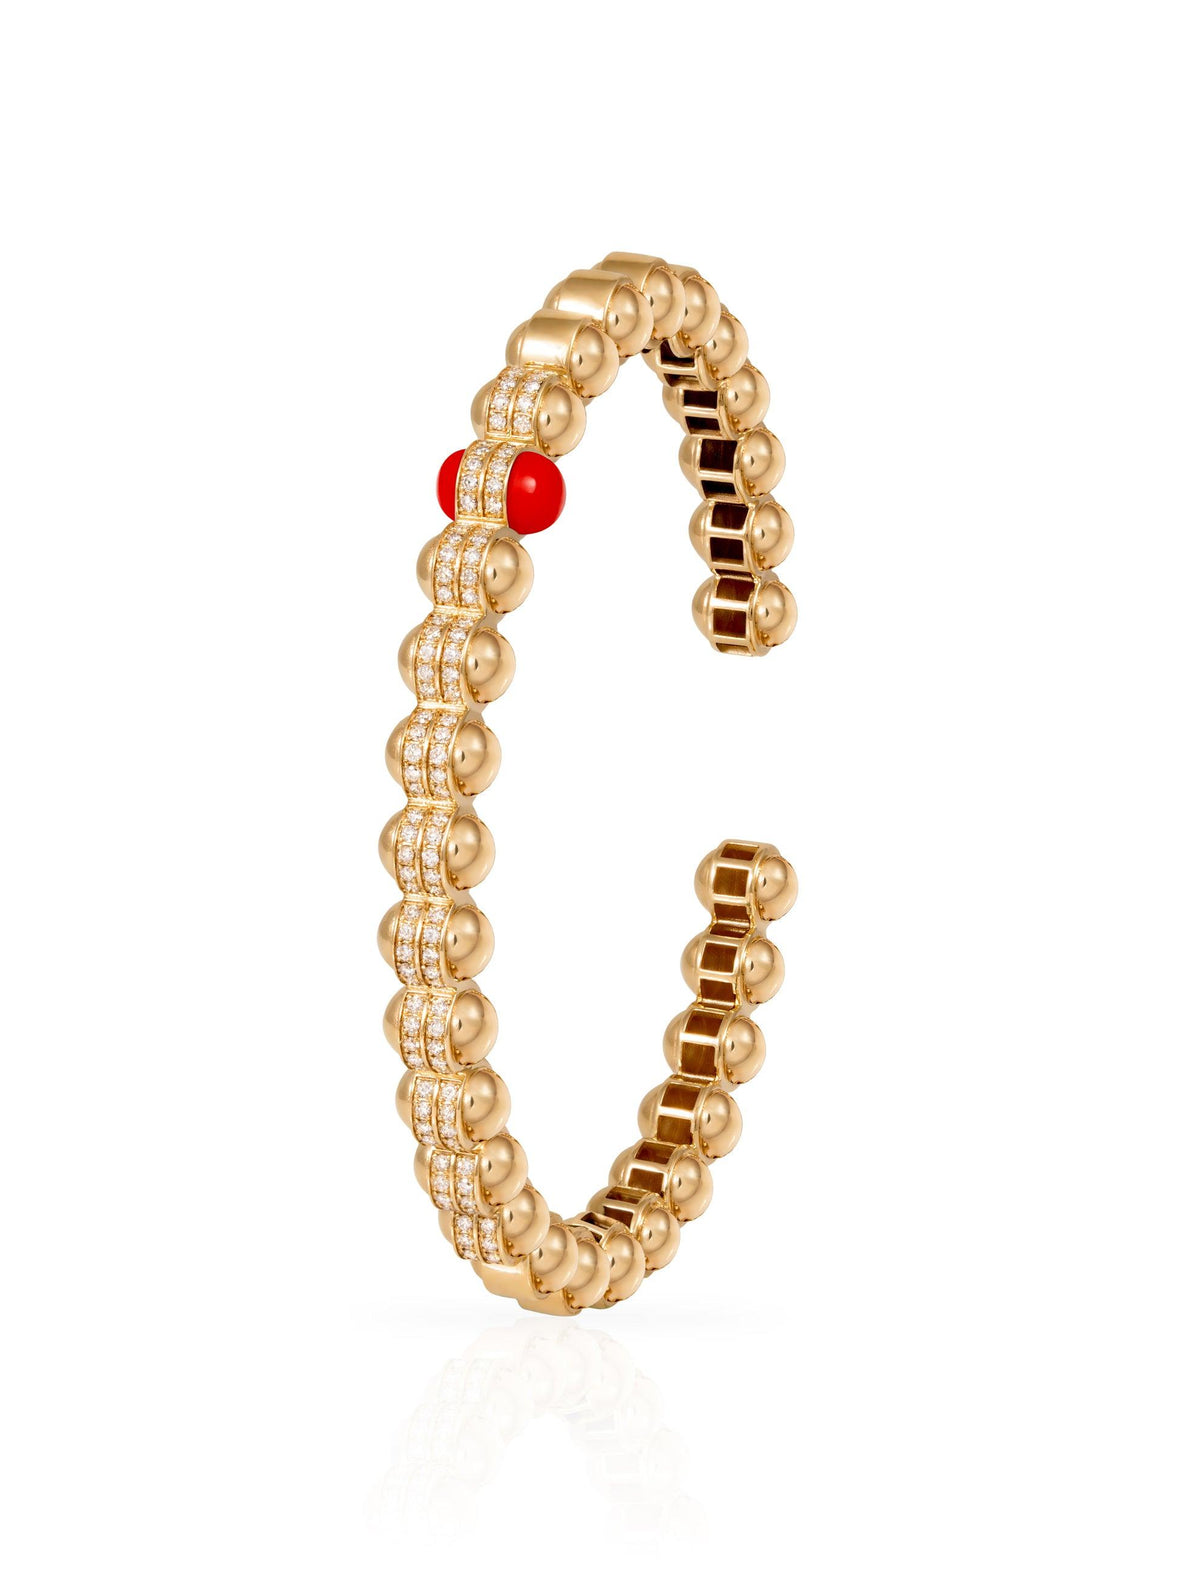 The Rubidium Gold Bangle by L'Atelier Nawbar (Size 2 - Red) - Tales of Stones